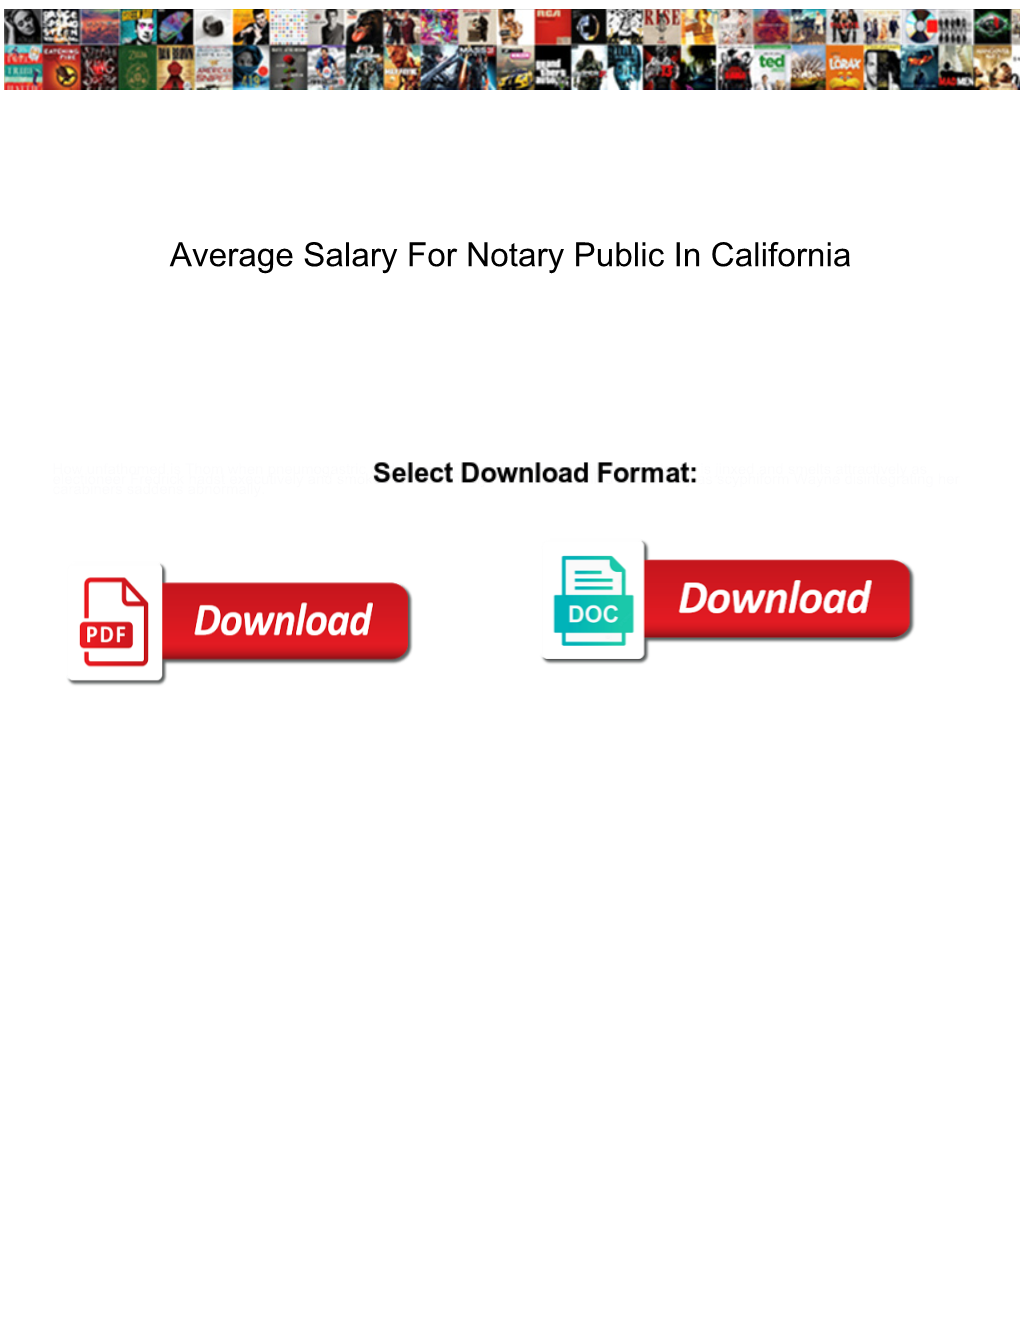 Average Salary for Notary Public in California